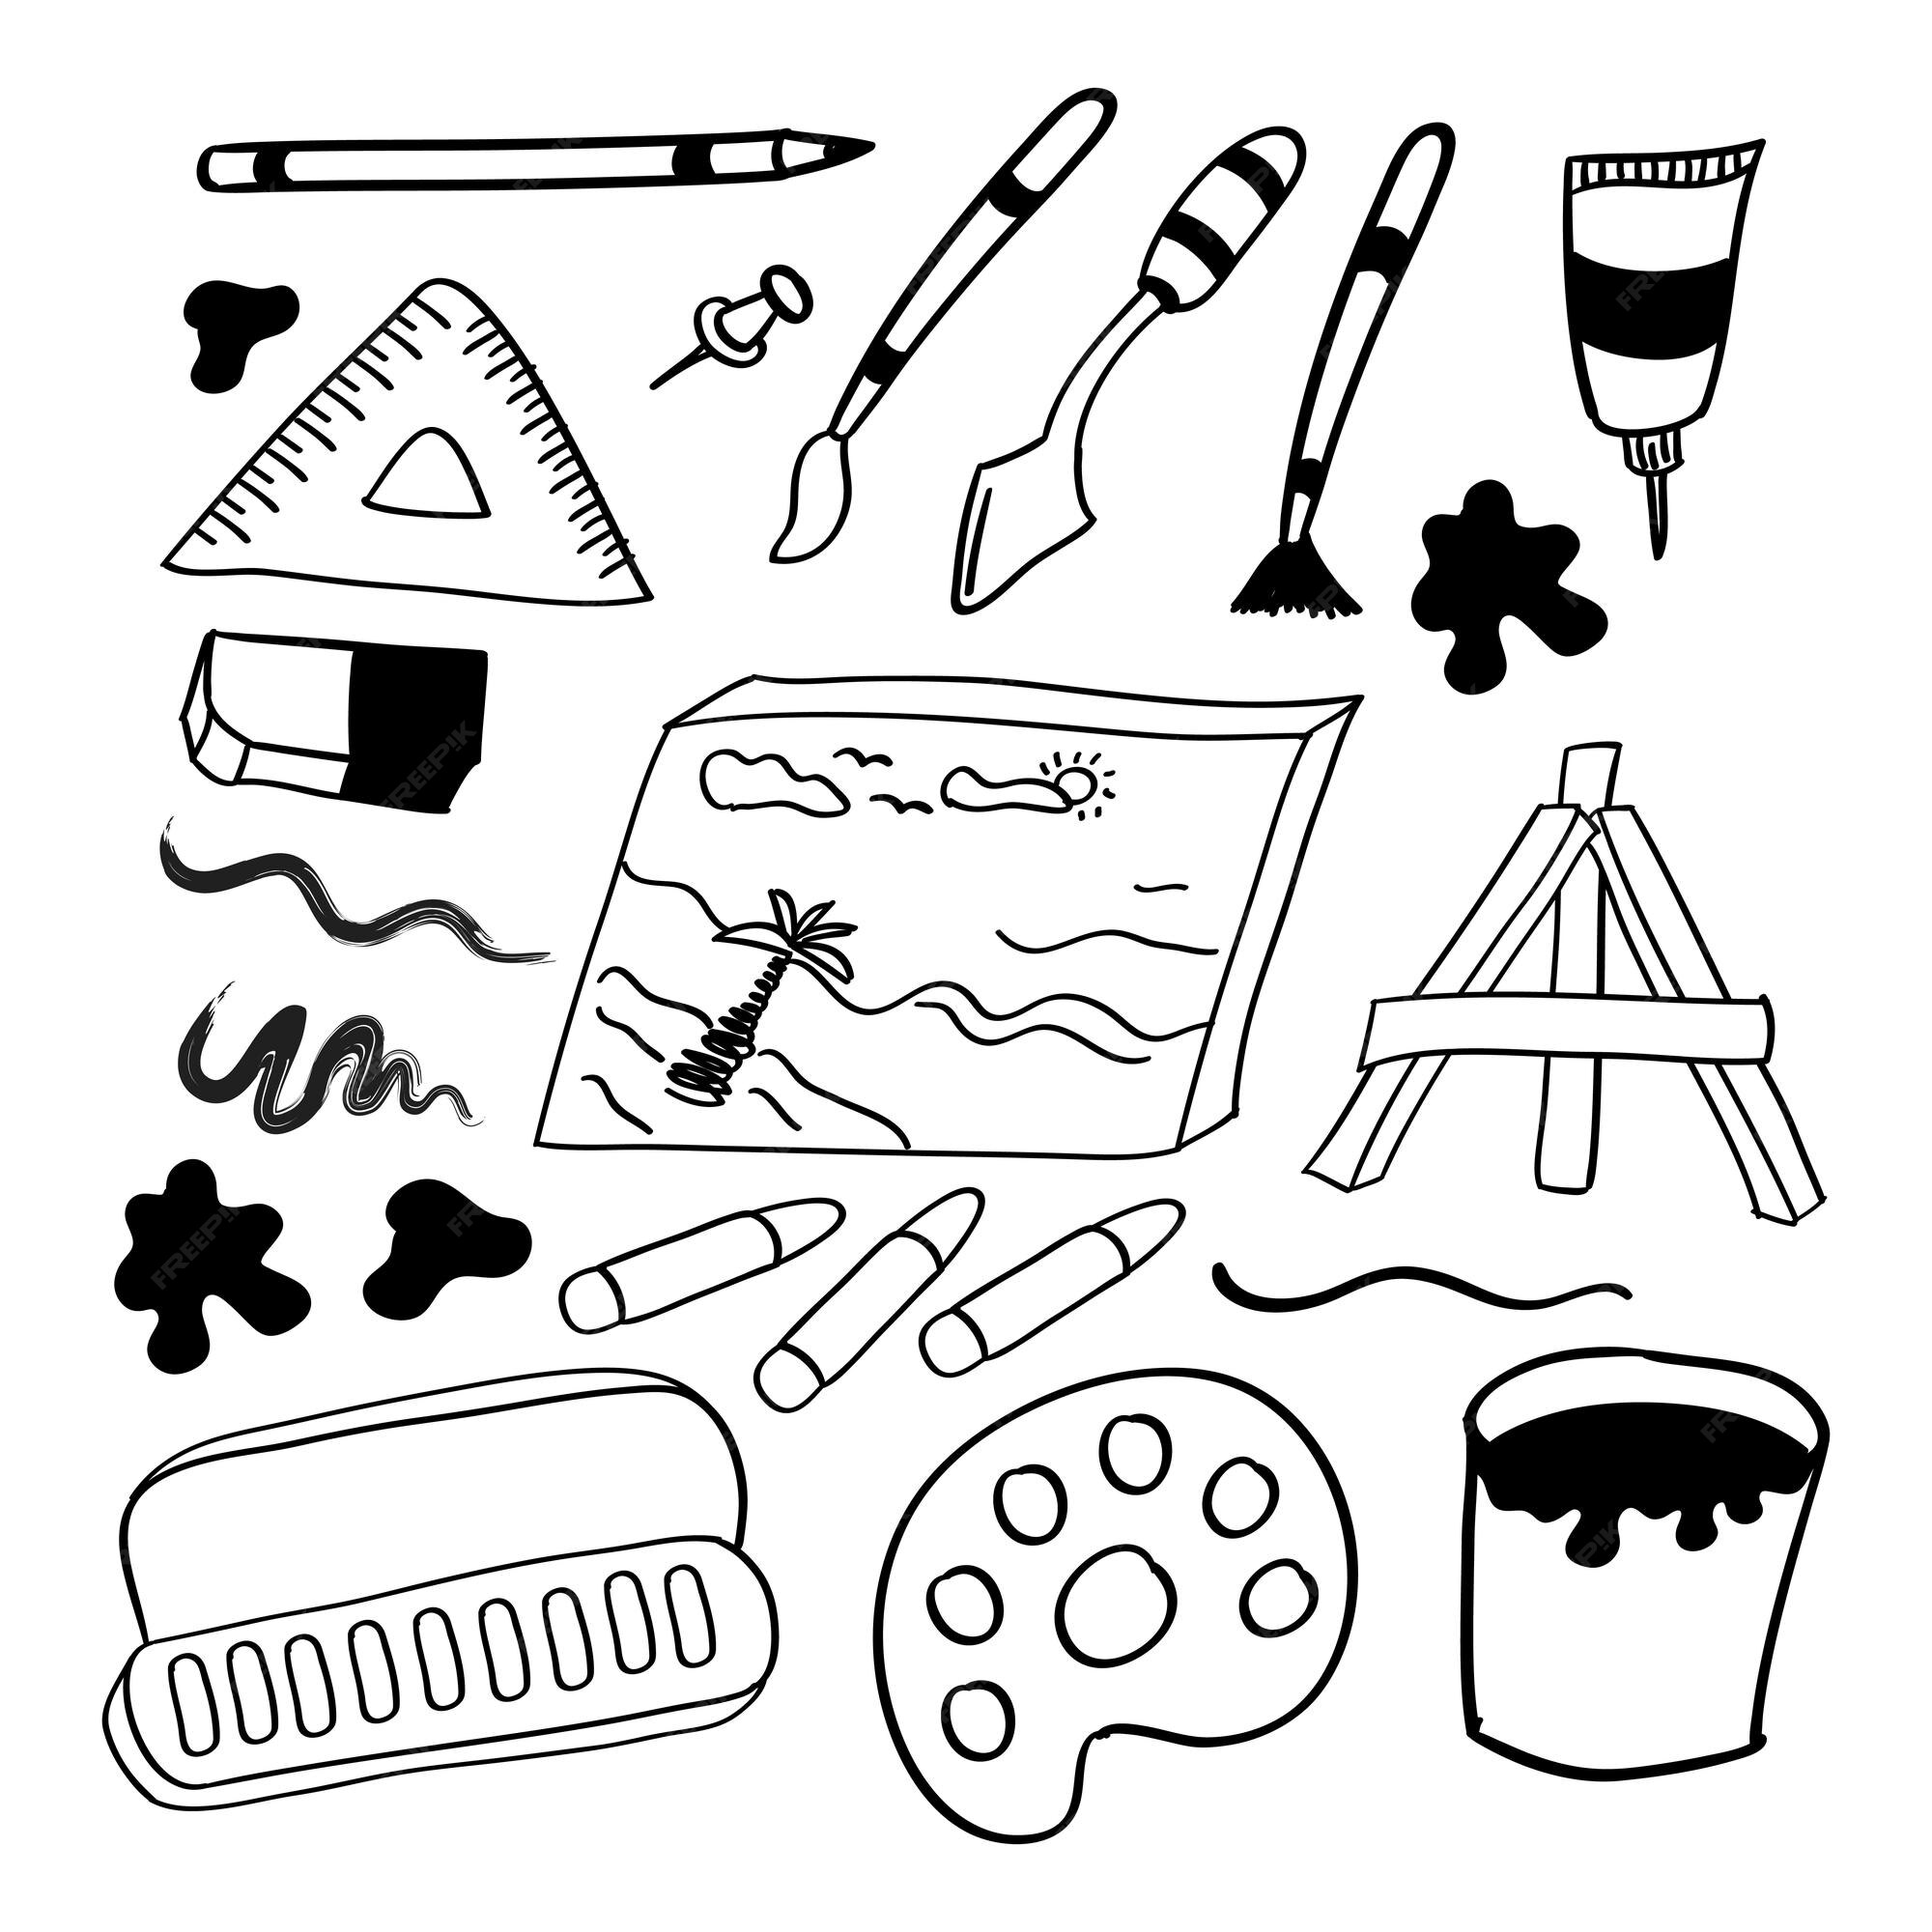 Hand Drawn Art And Craft Vector Symbols And Objects Stock Illustration -  Download Image Now - iStock